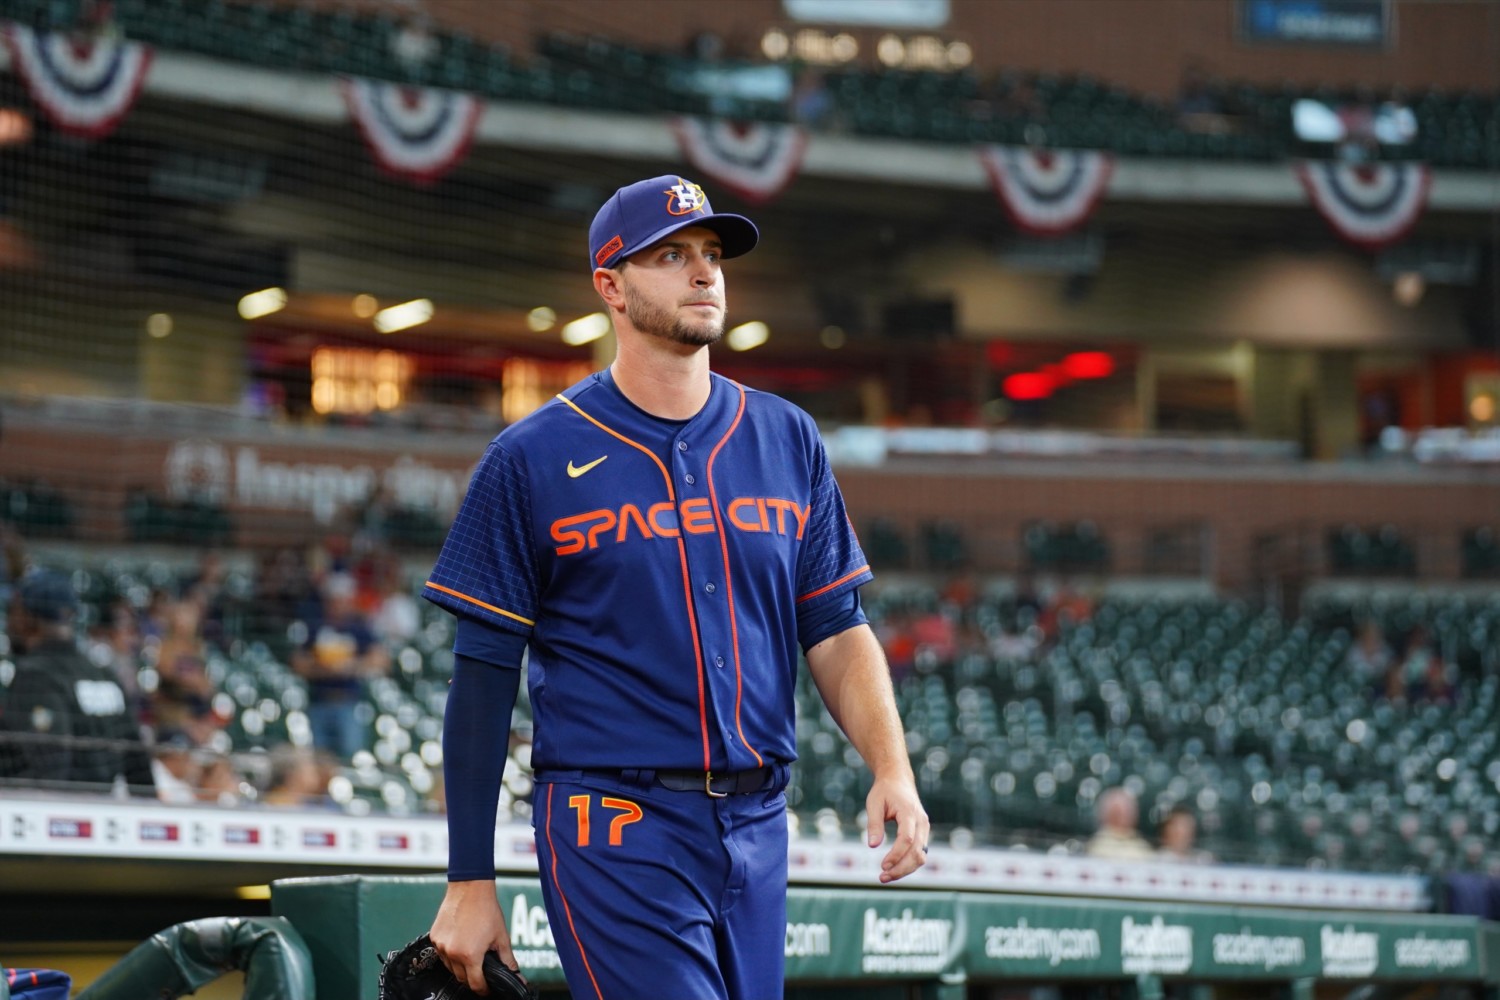 new space city jersey astros